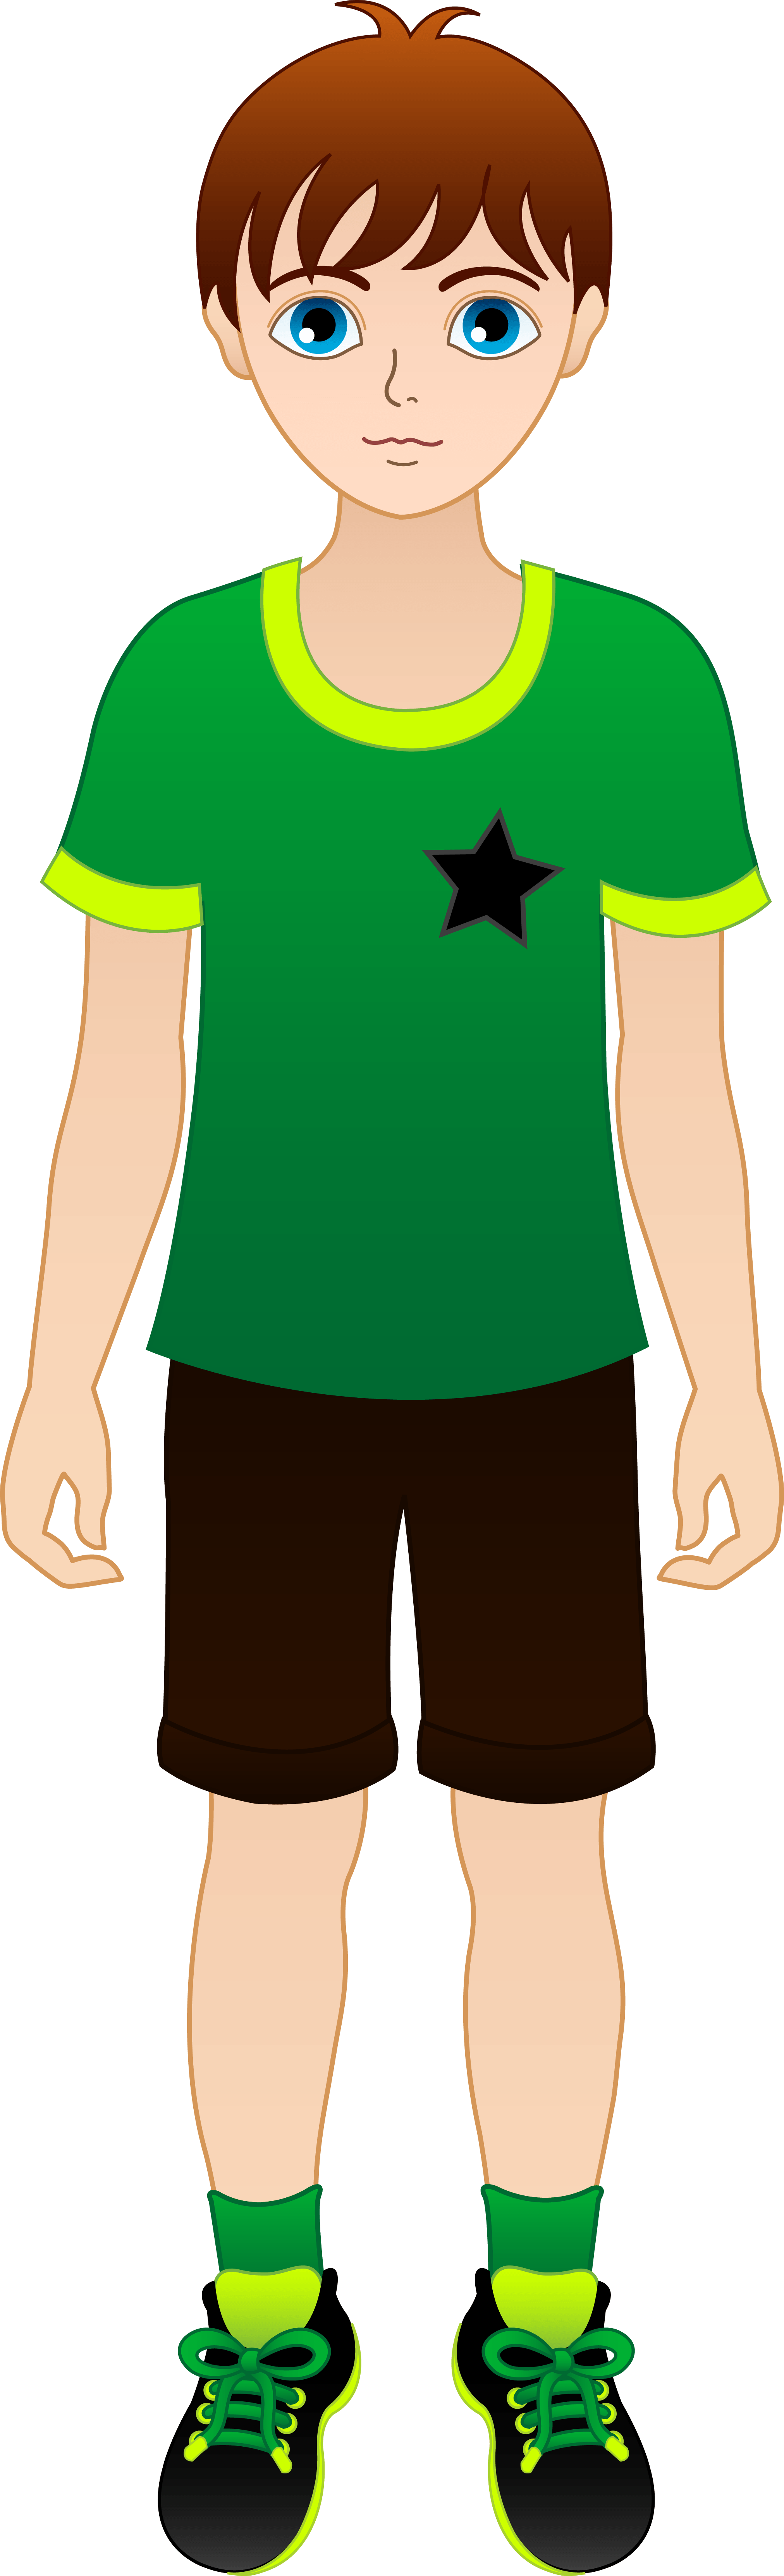 Cute young boys body clipart